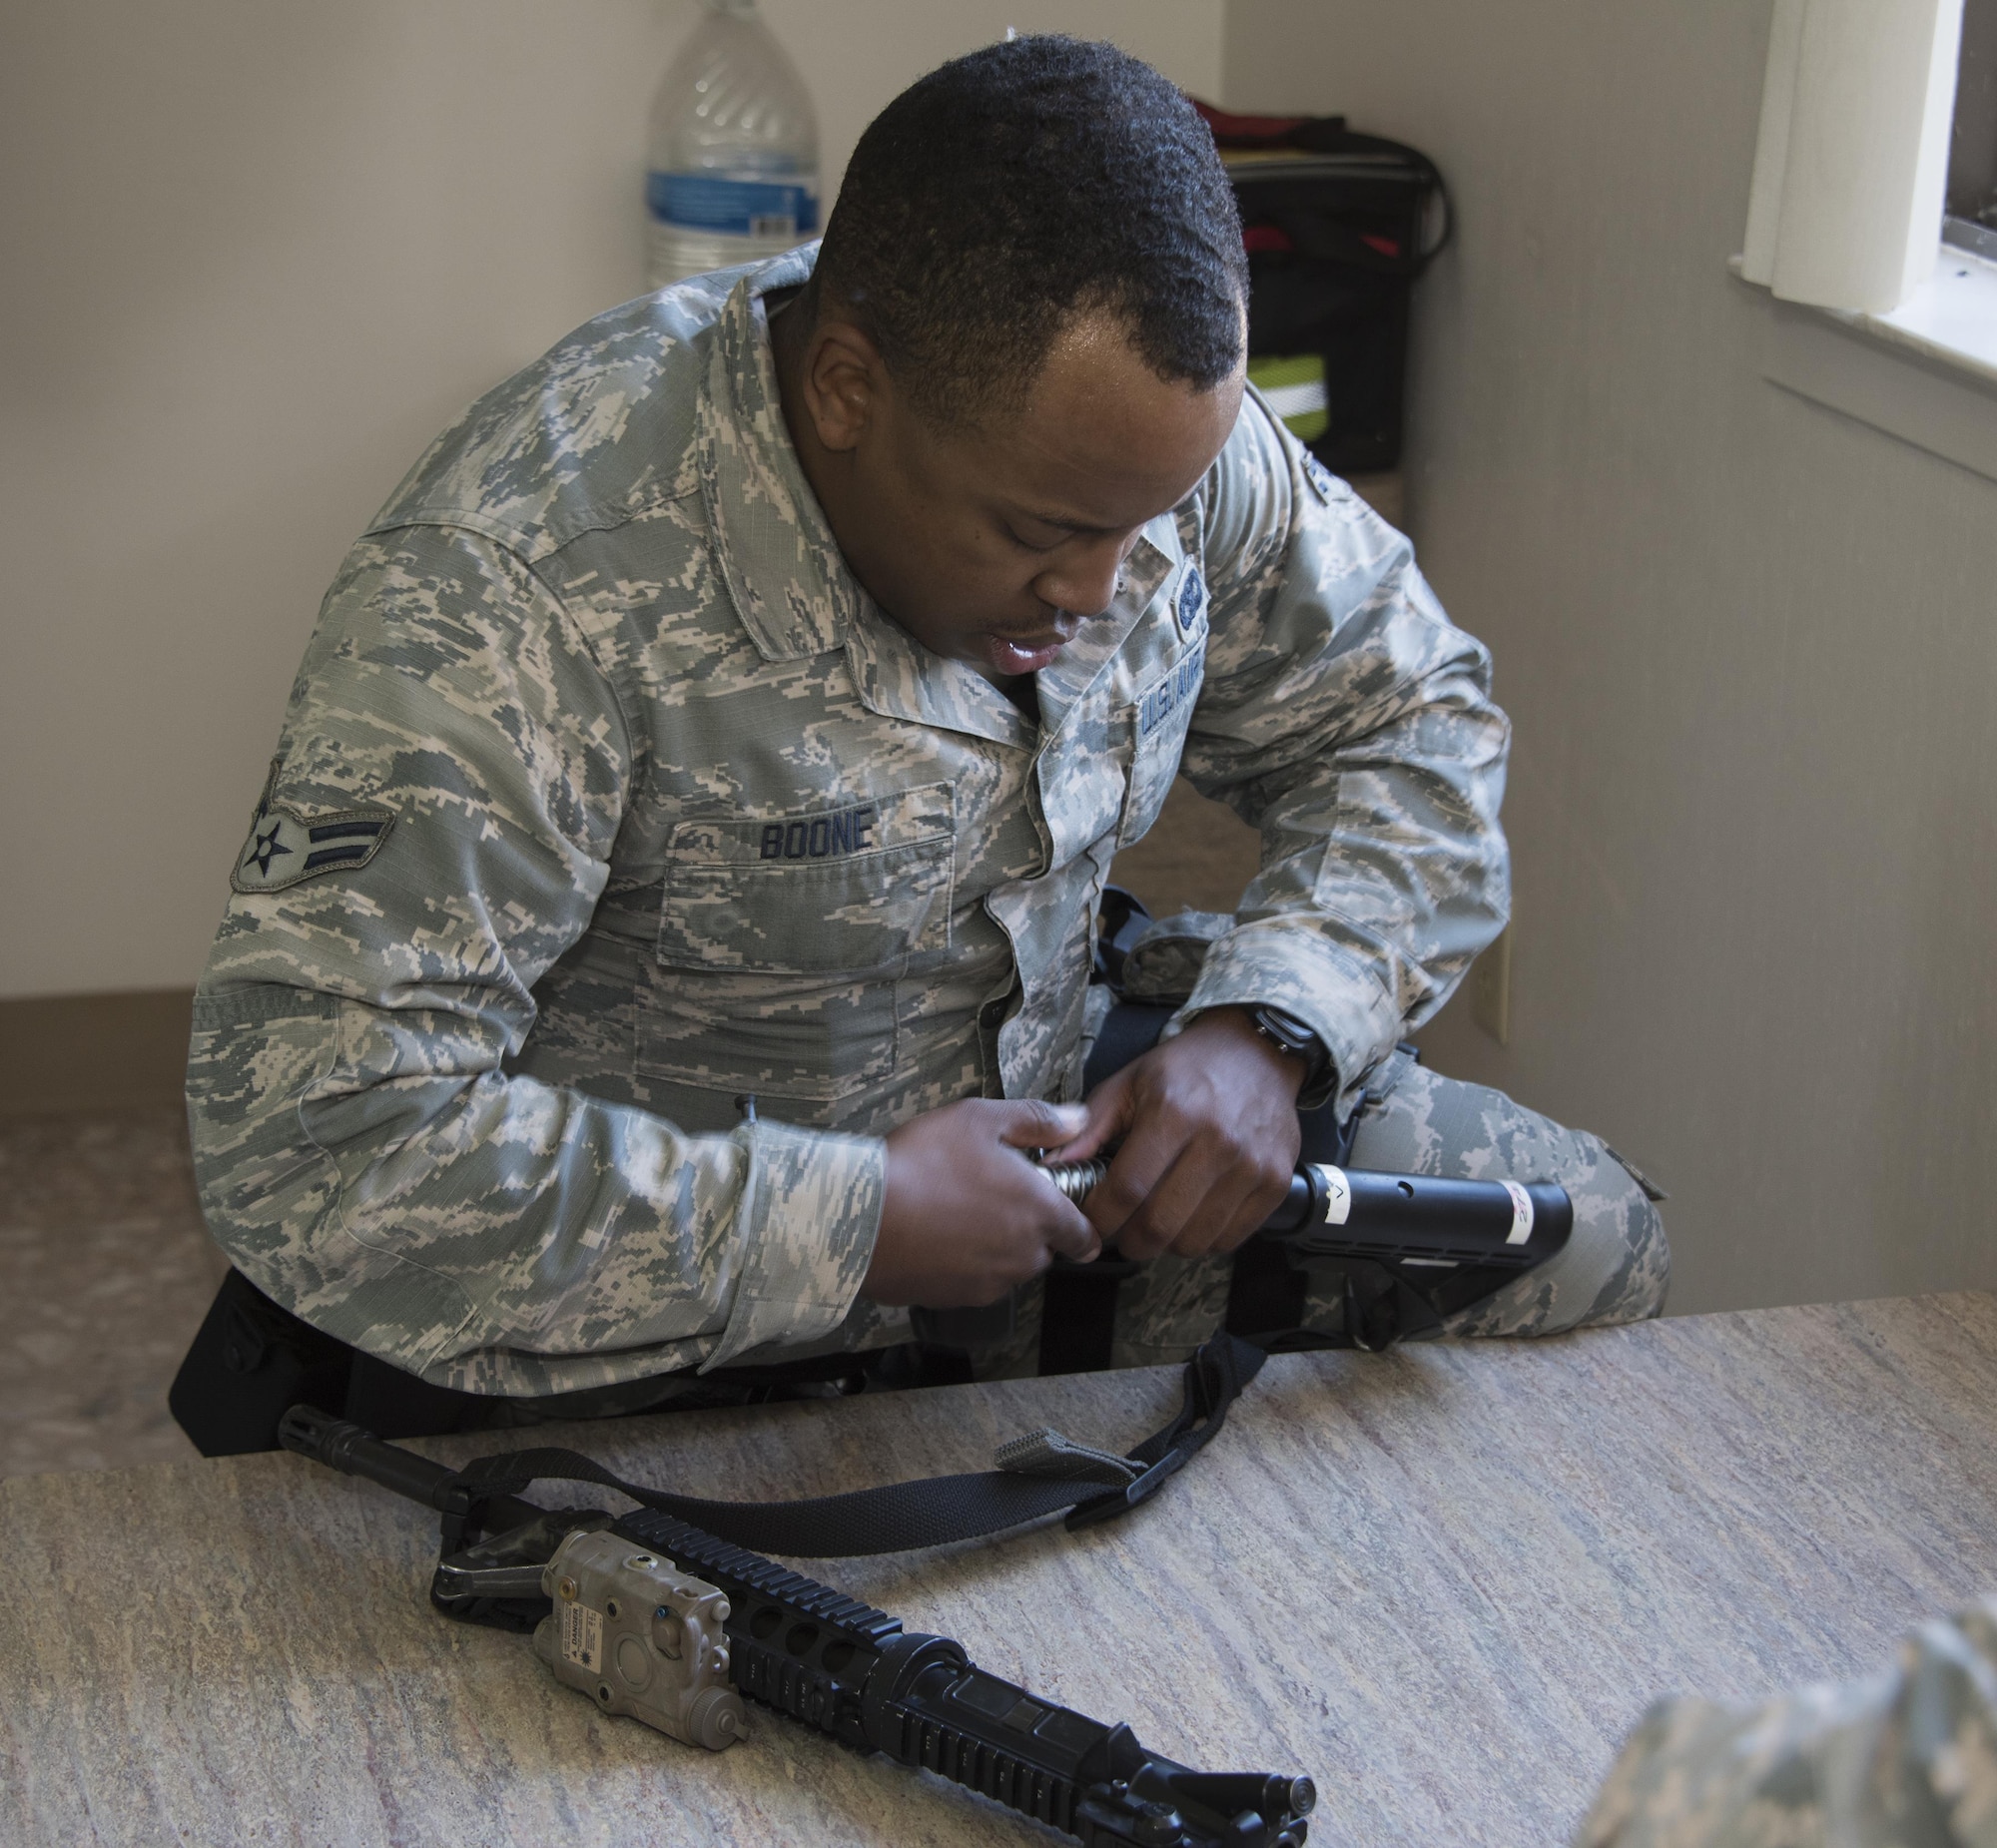 U.S. Air Force Airman 1st Class Christopher Boone with 60th Security Forces Squadron, has minutes to dissemble and reassemble a weapon while answering questions being rapidly asked by an instructor during Defender Annual Refresher crucible training, Oct. 27, Travis Air Force Base, Calif.  60th SFS team members go through a 30-day period of intense training for the DART program. The teams of specially trained security forces personnel are dedicated to providing security for terrorist and criminal threat areas.